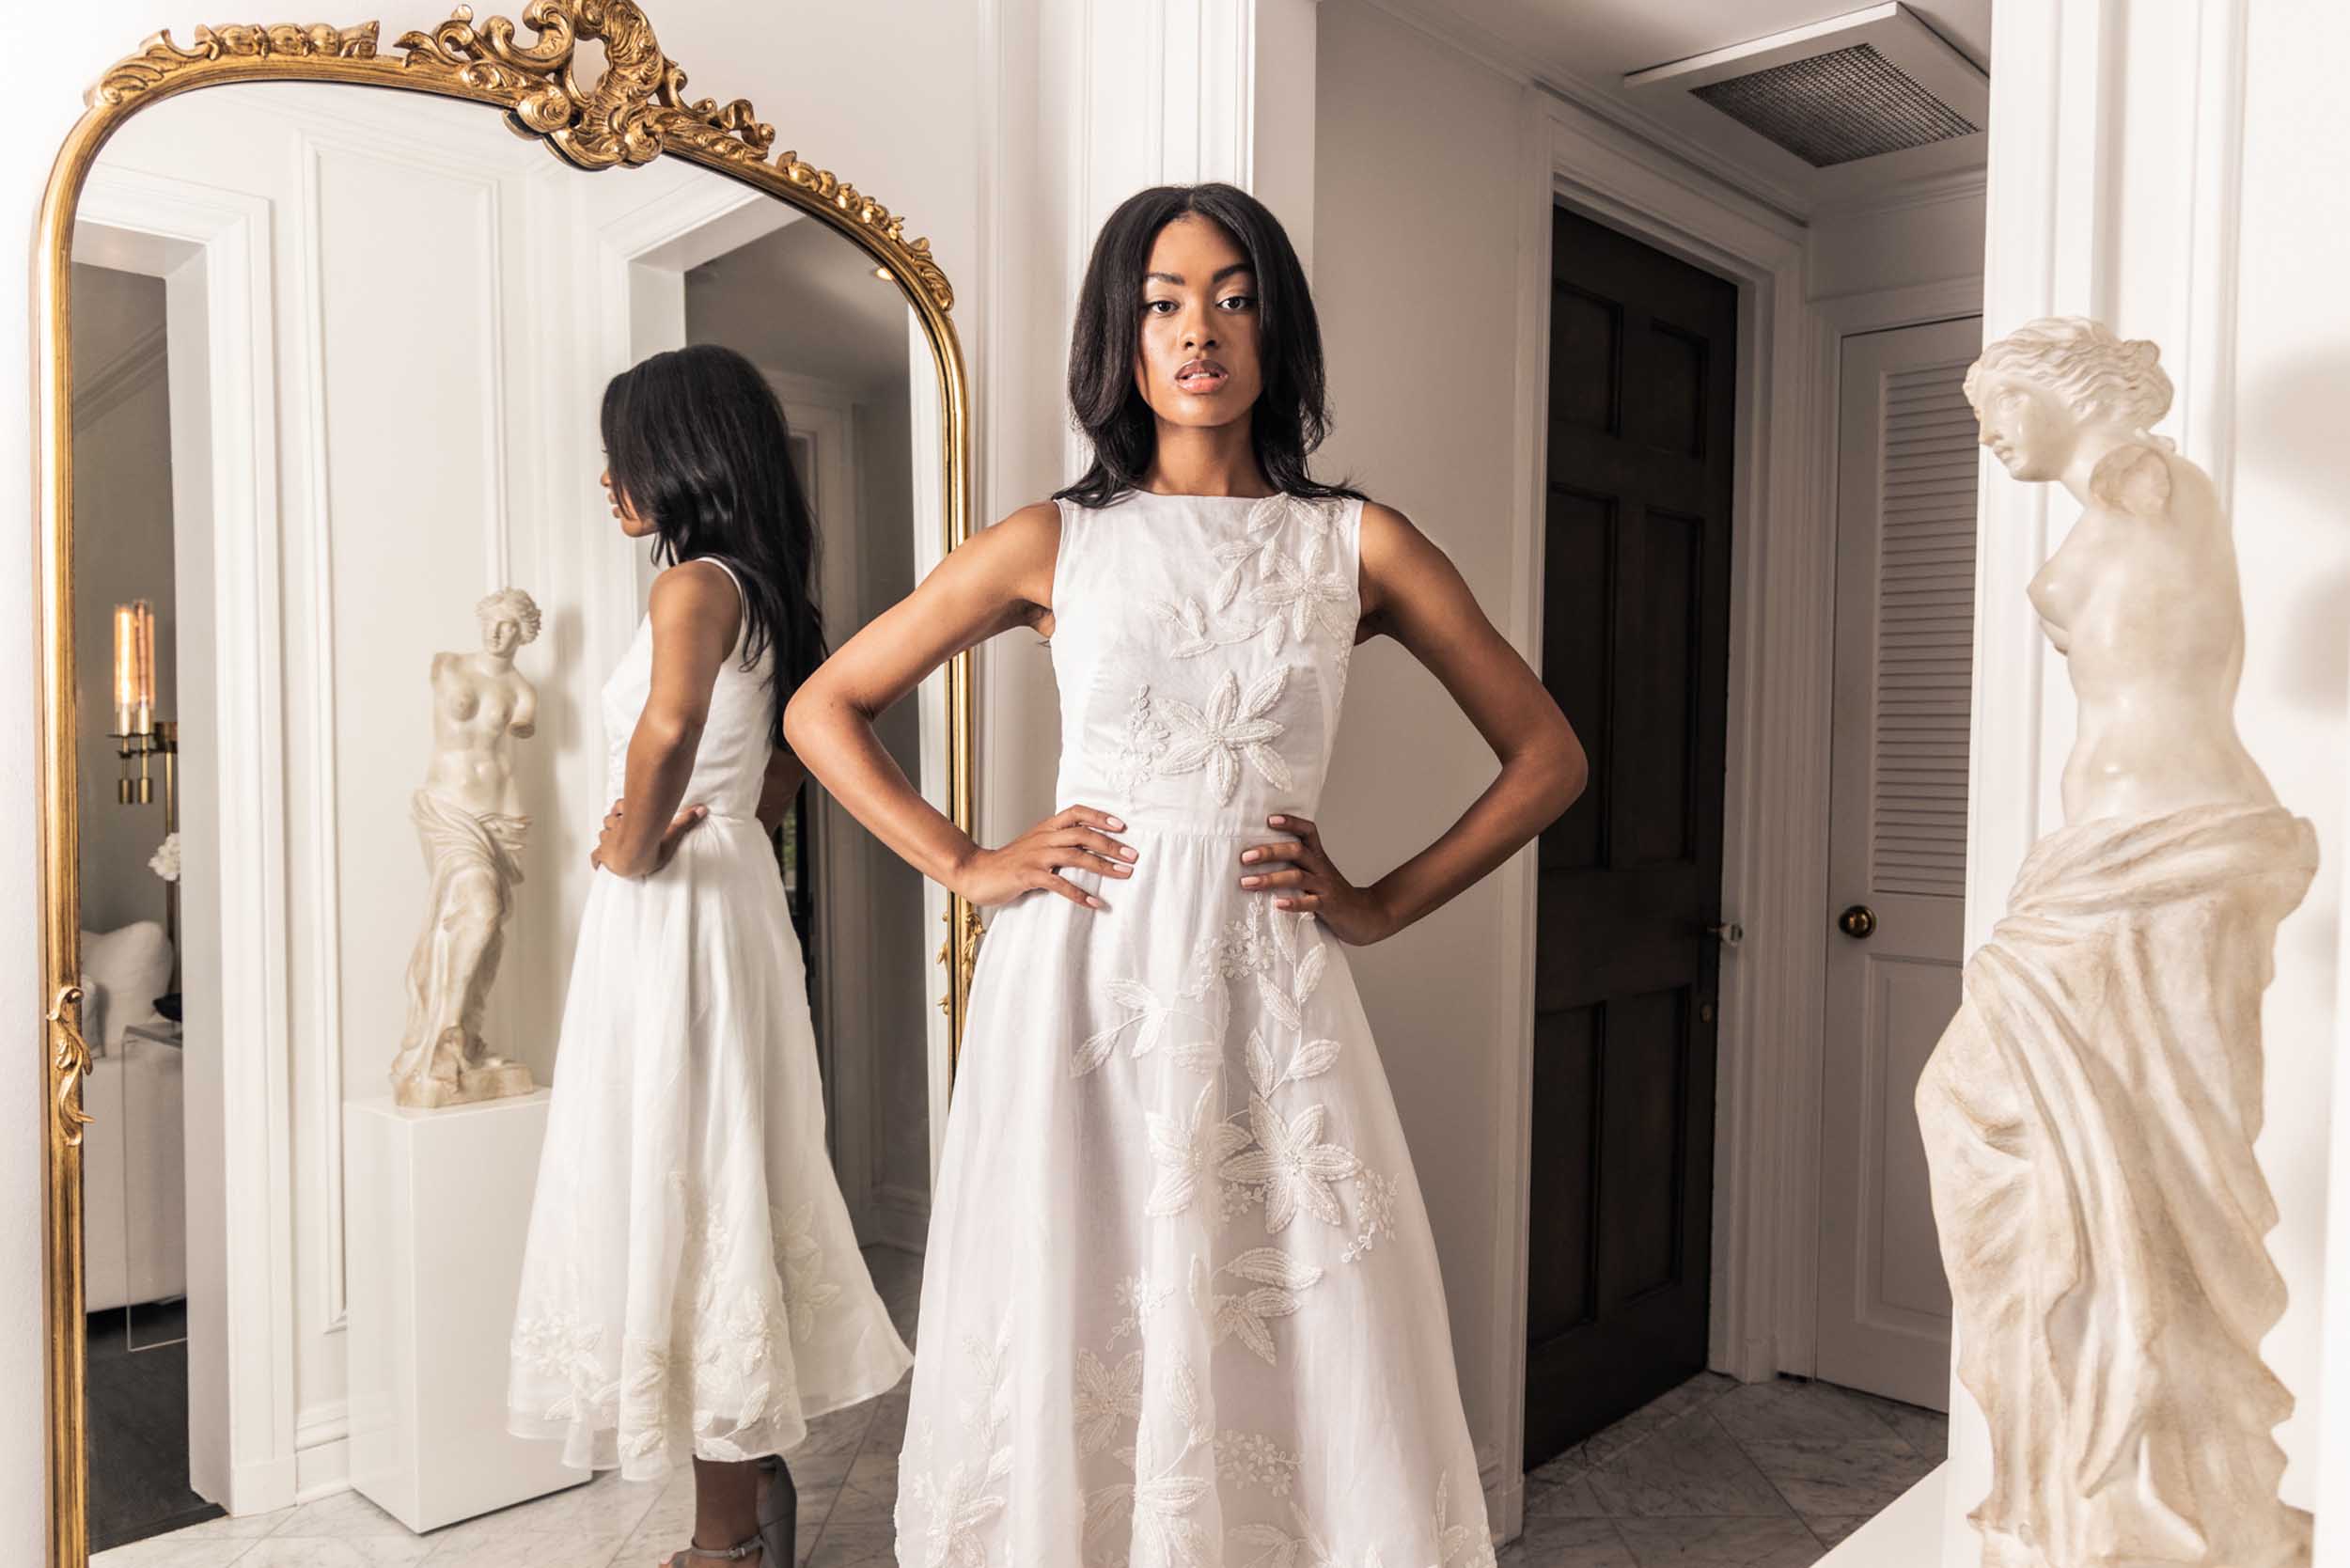 Gorgeous model in a beaded white tea-length Sujata Gazder gown in a chic setting with ornate mirror and statue